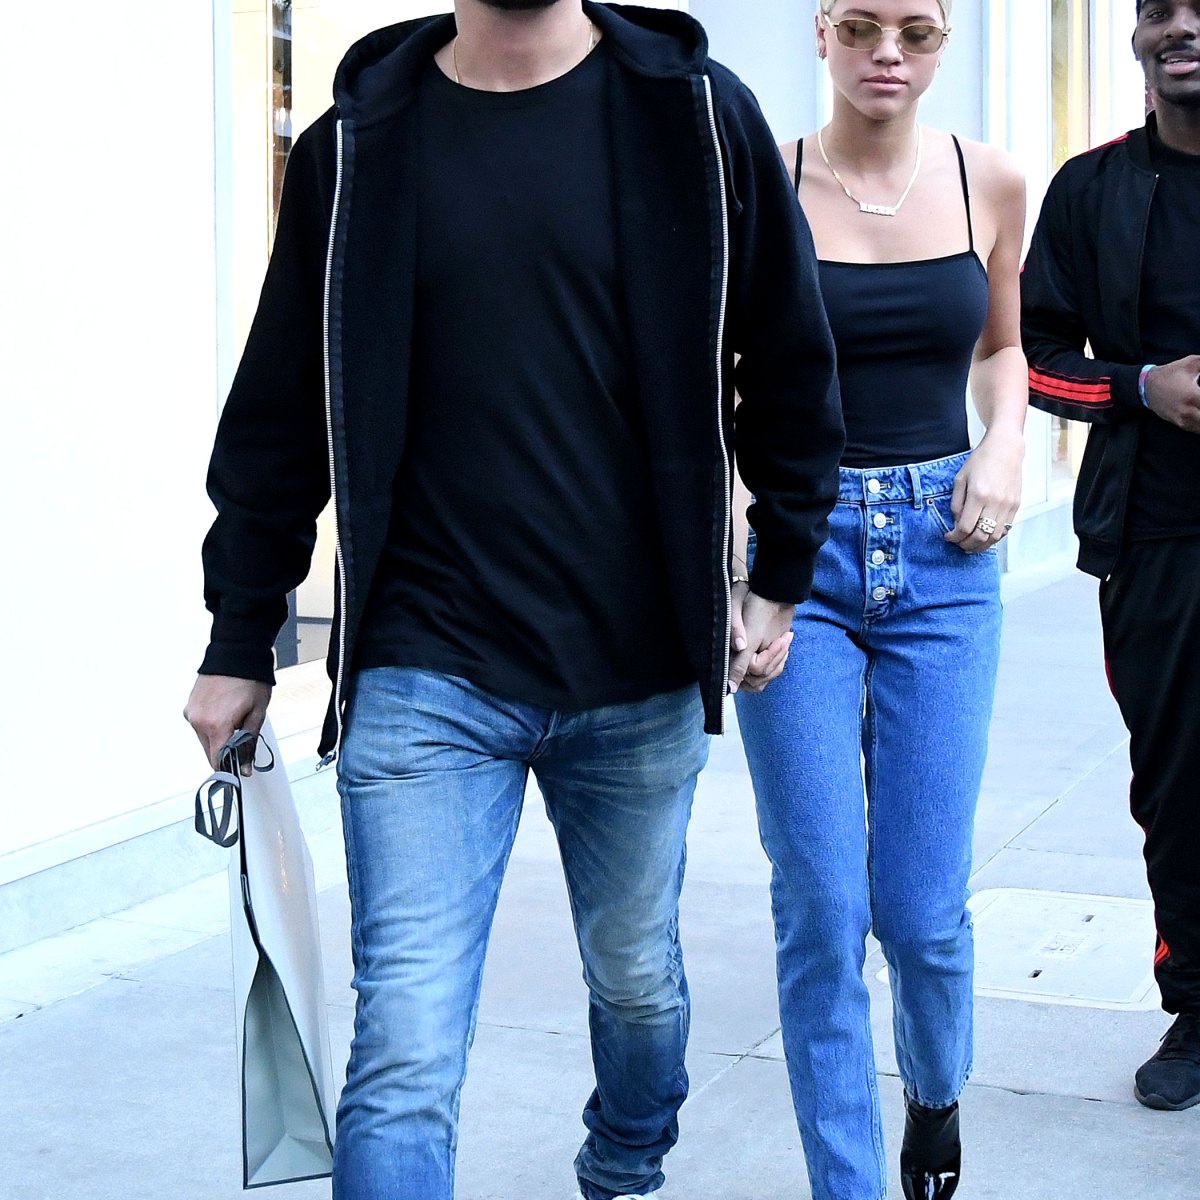 Sofia Richie With Scott Disick September 13, 2017 – Star Style